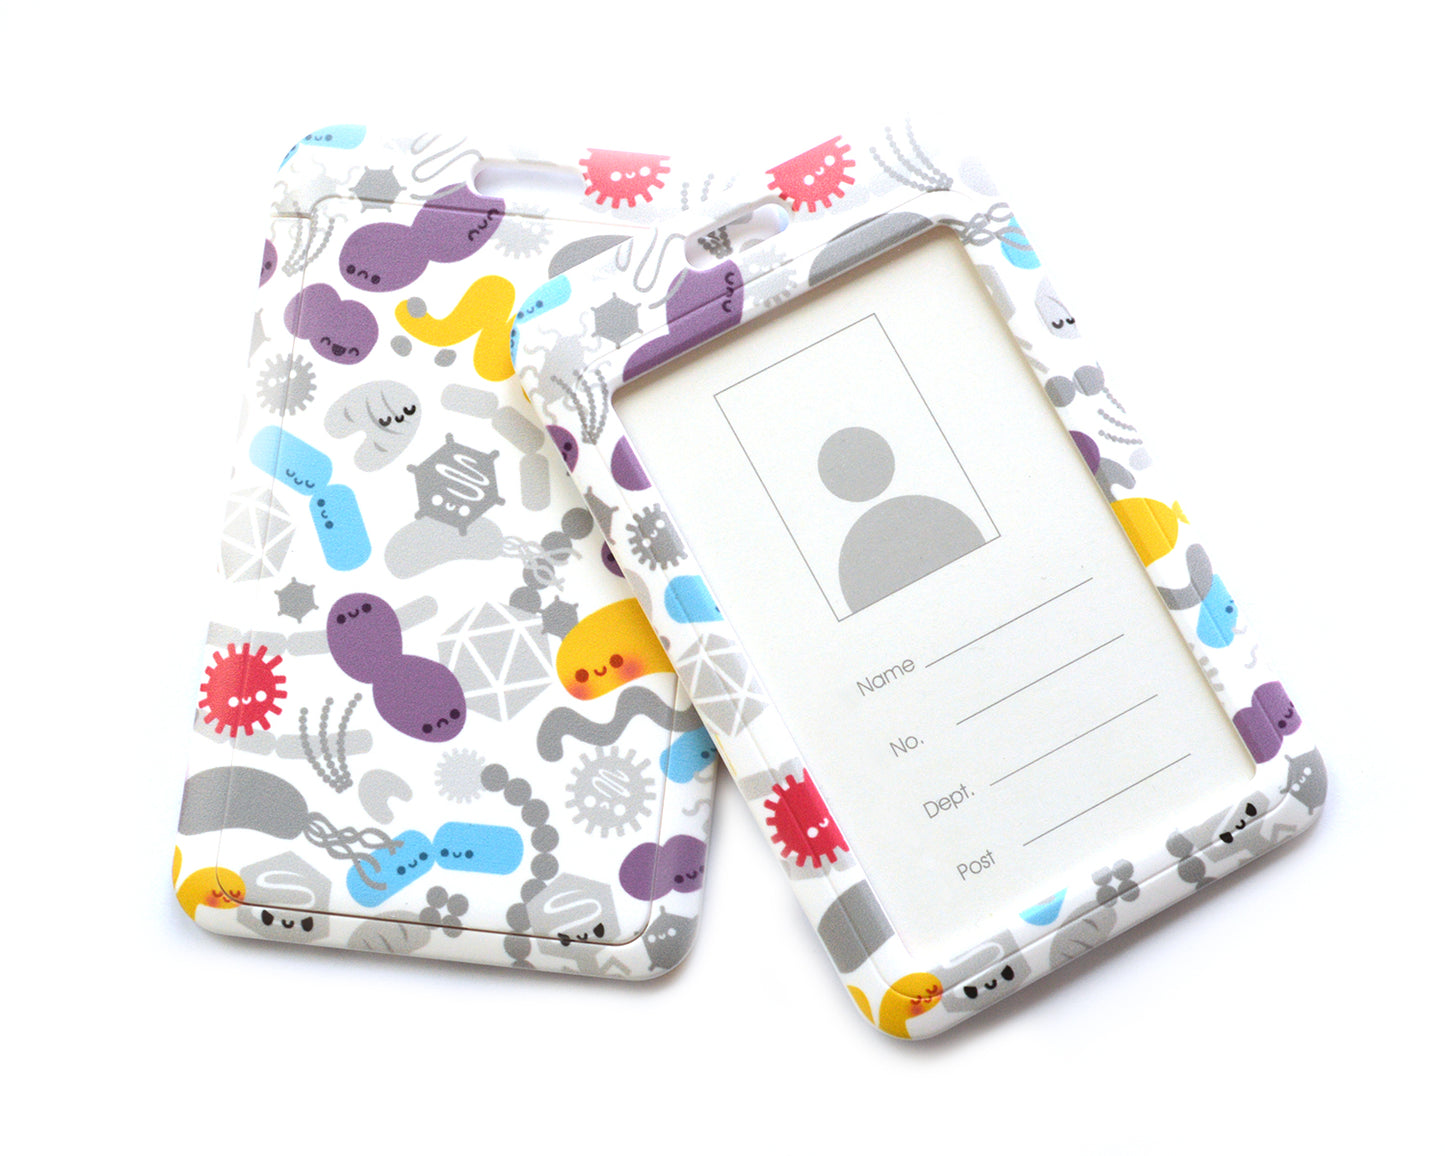 Microbiology ID Card Case